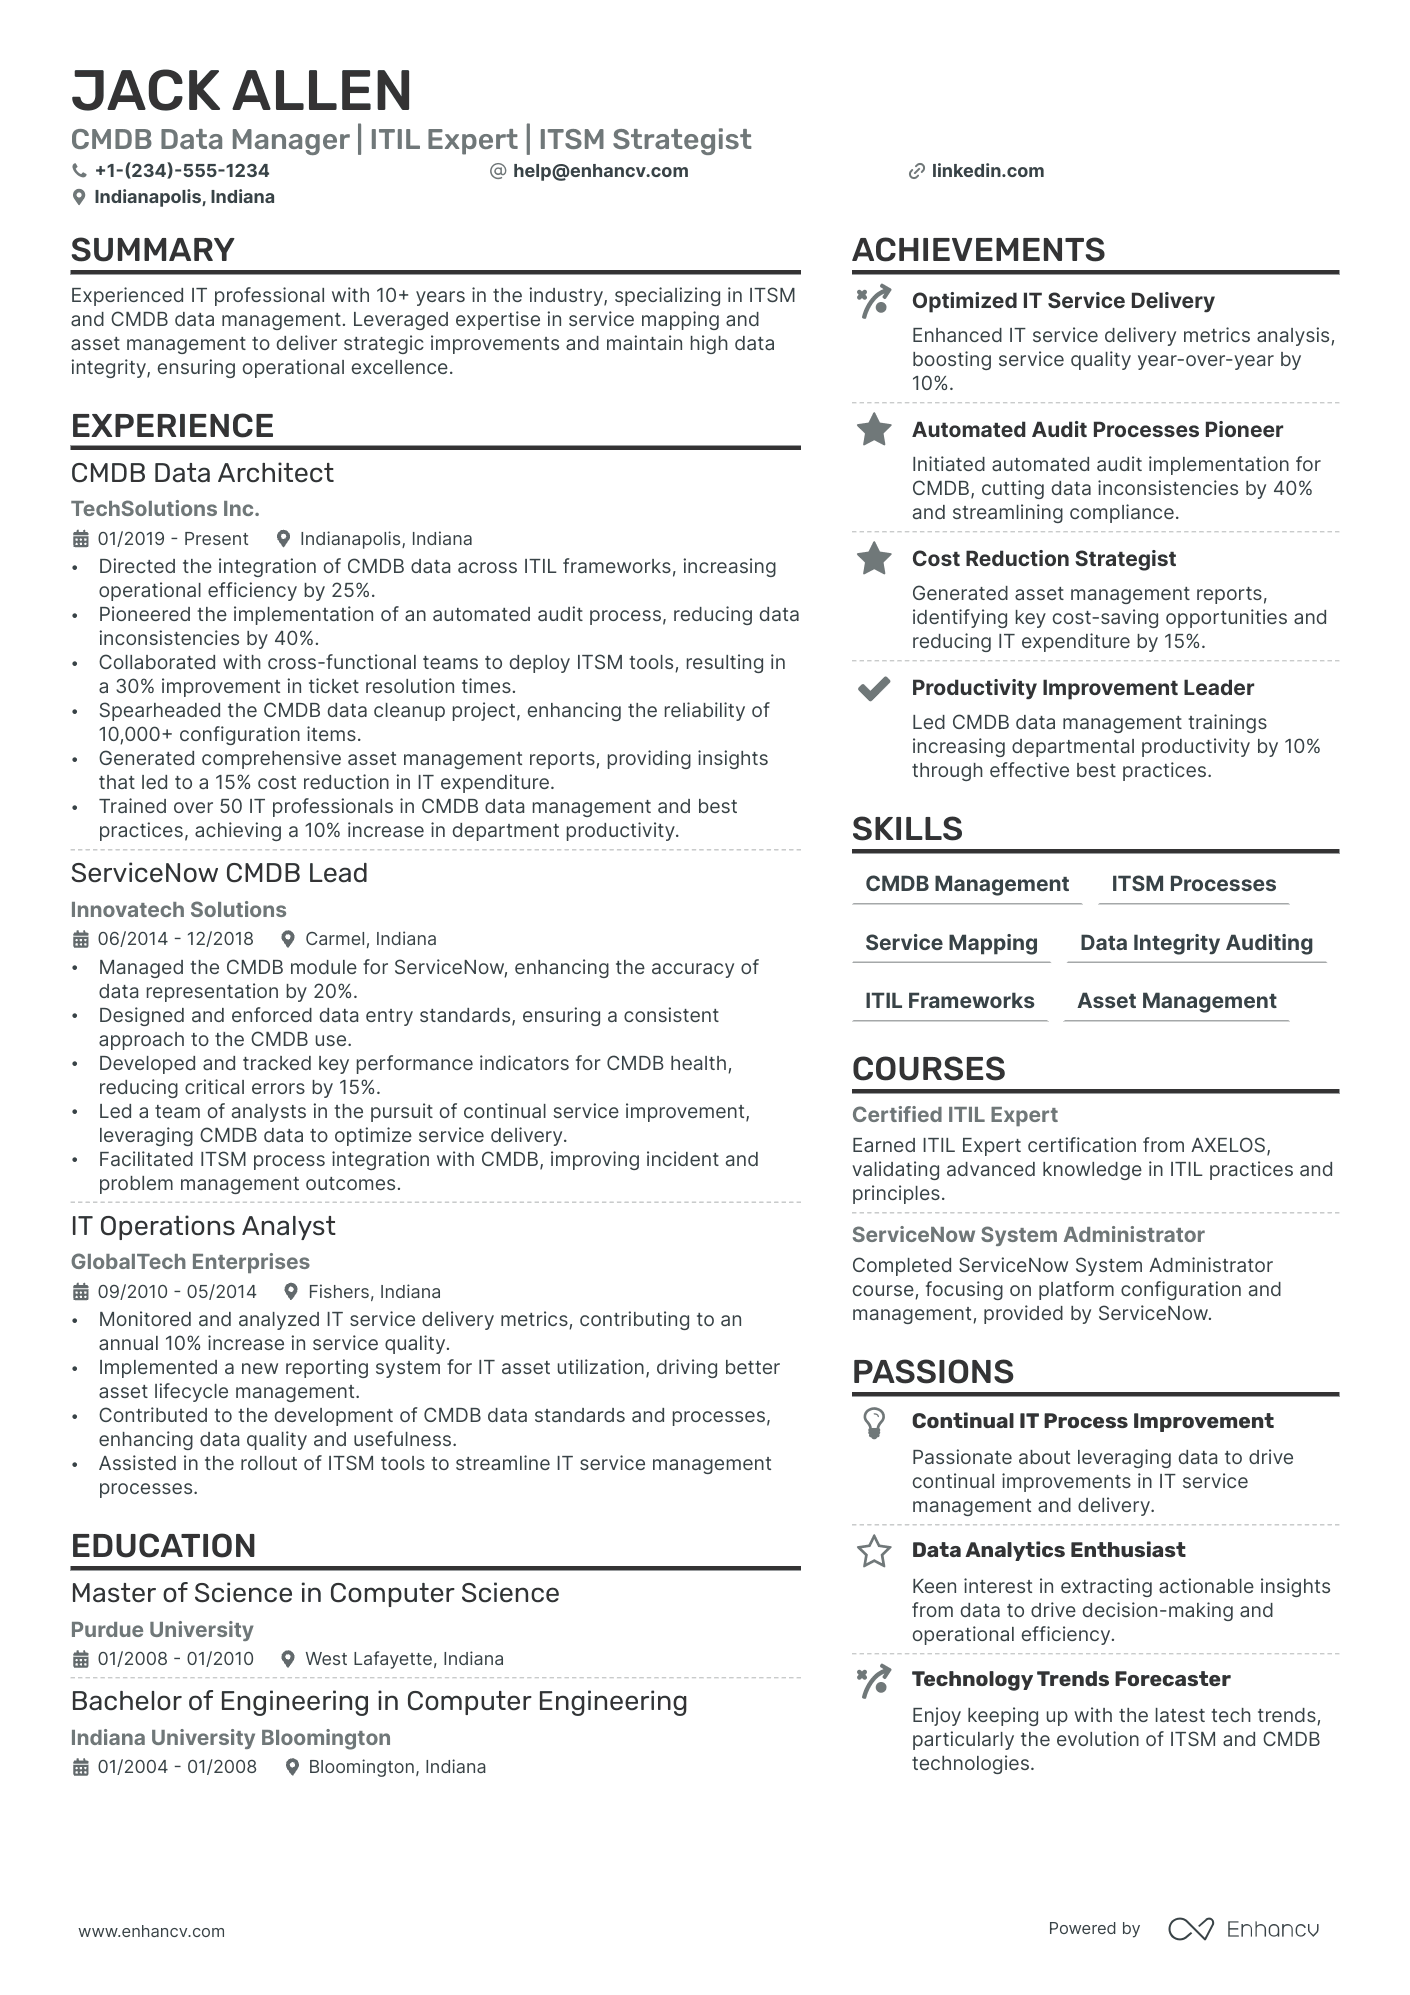 Servicenow Business Analyst resume example